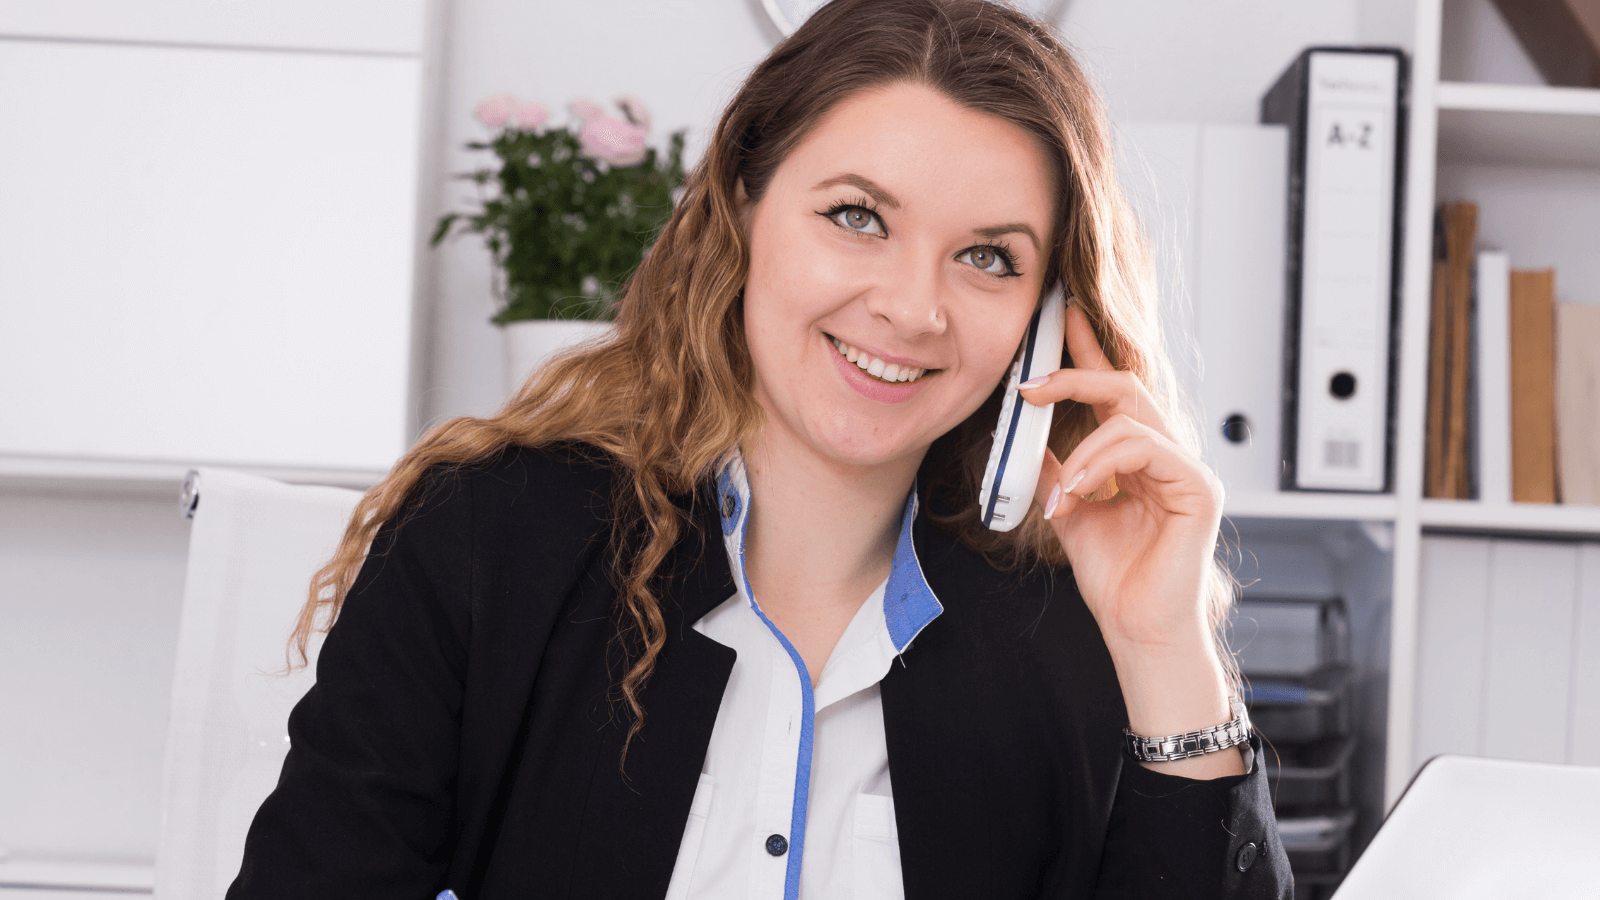 Recruitment consultant on the phone delivering a 360° recruitment service